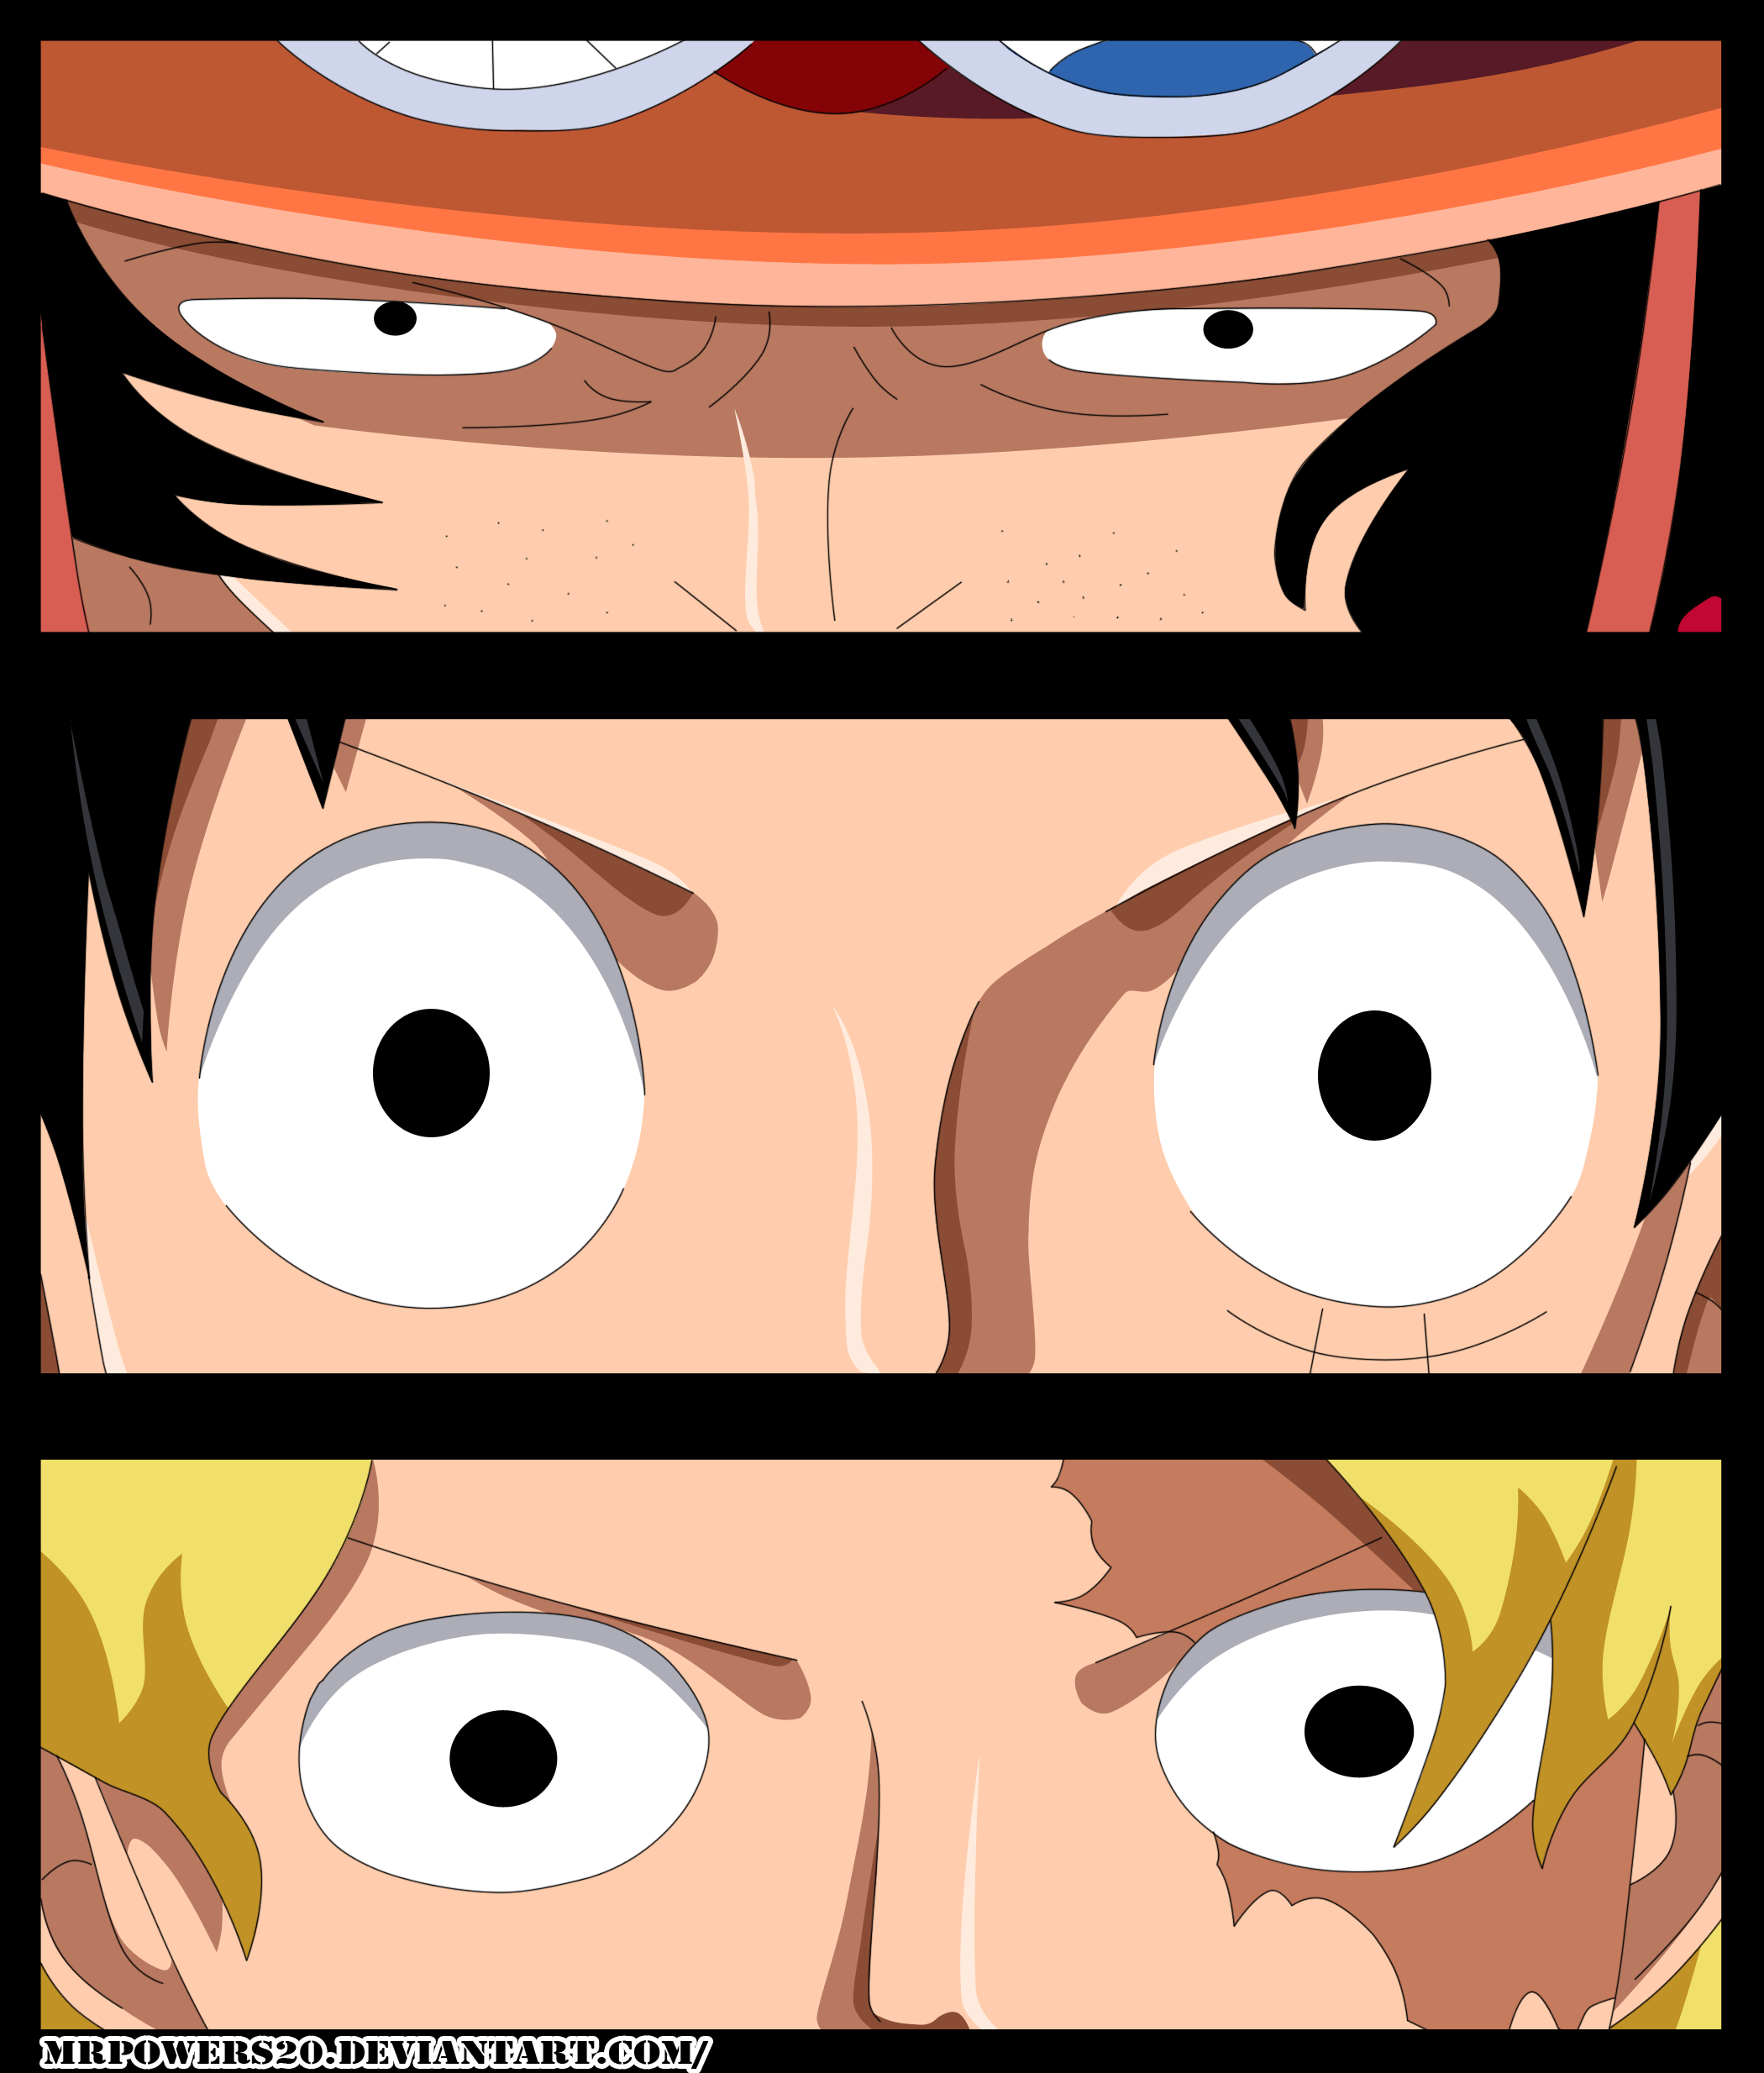 Ace, Sabo and Luffy